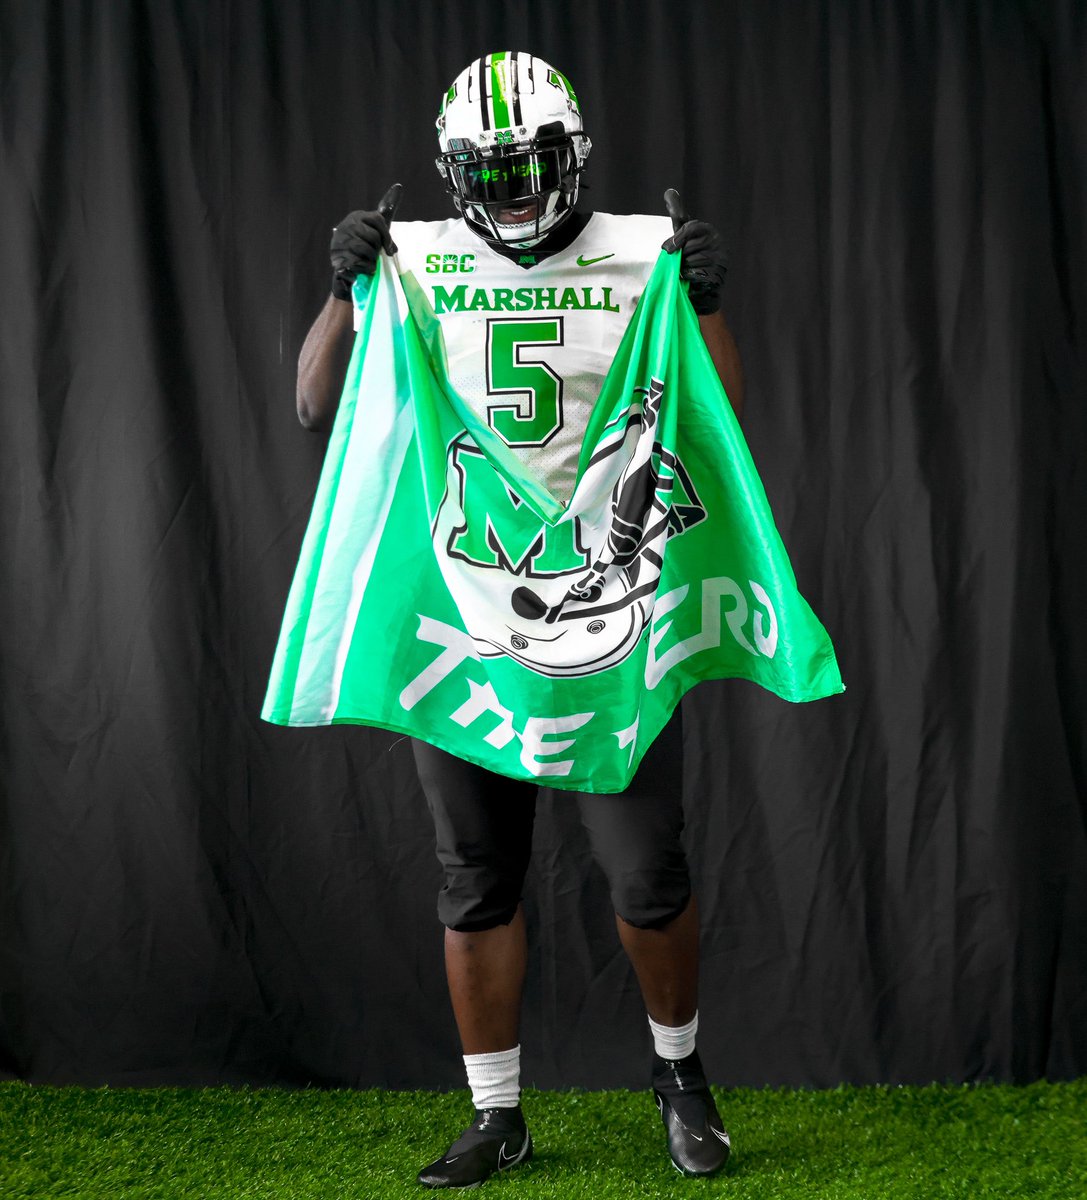 Home 💚🖤 @HerdFB